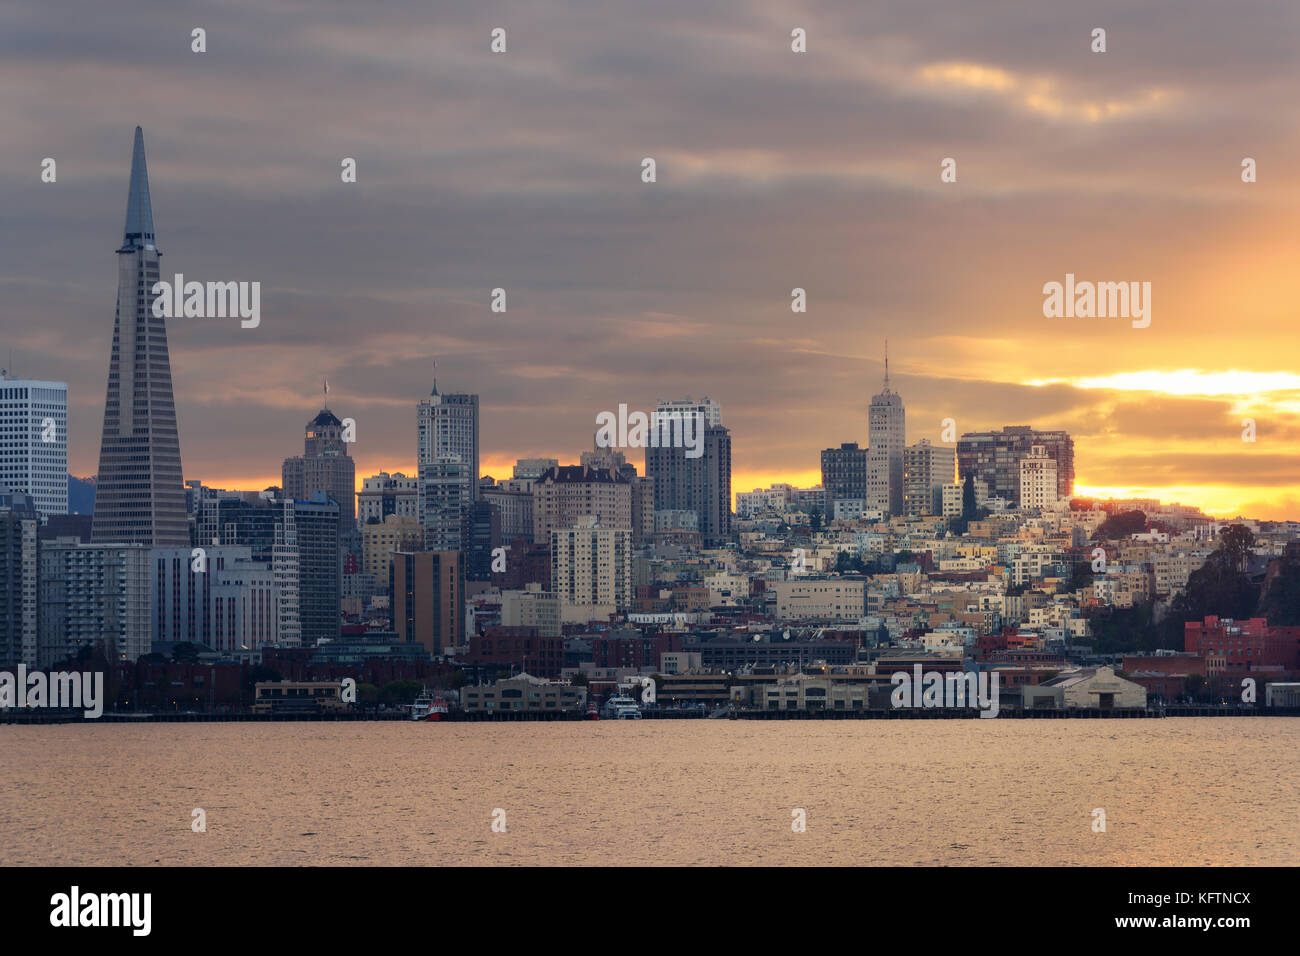 Skyline of Bay Area in San Francisco, California. Panorama of Bay Bridge and big city after sunset. Stock Photo